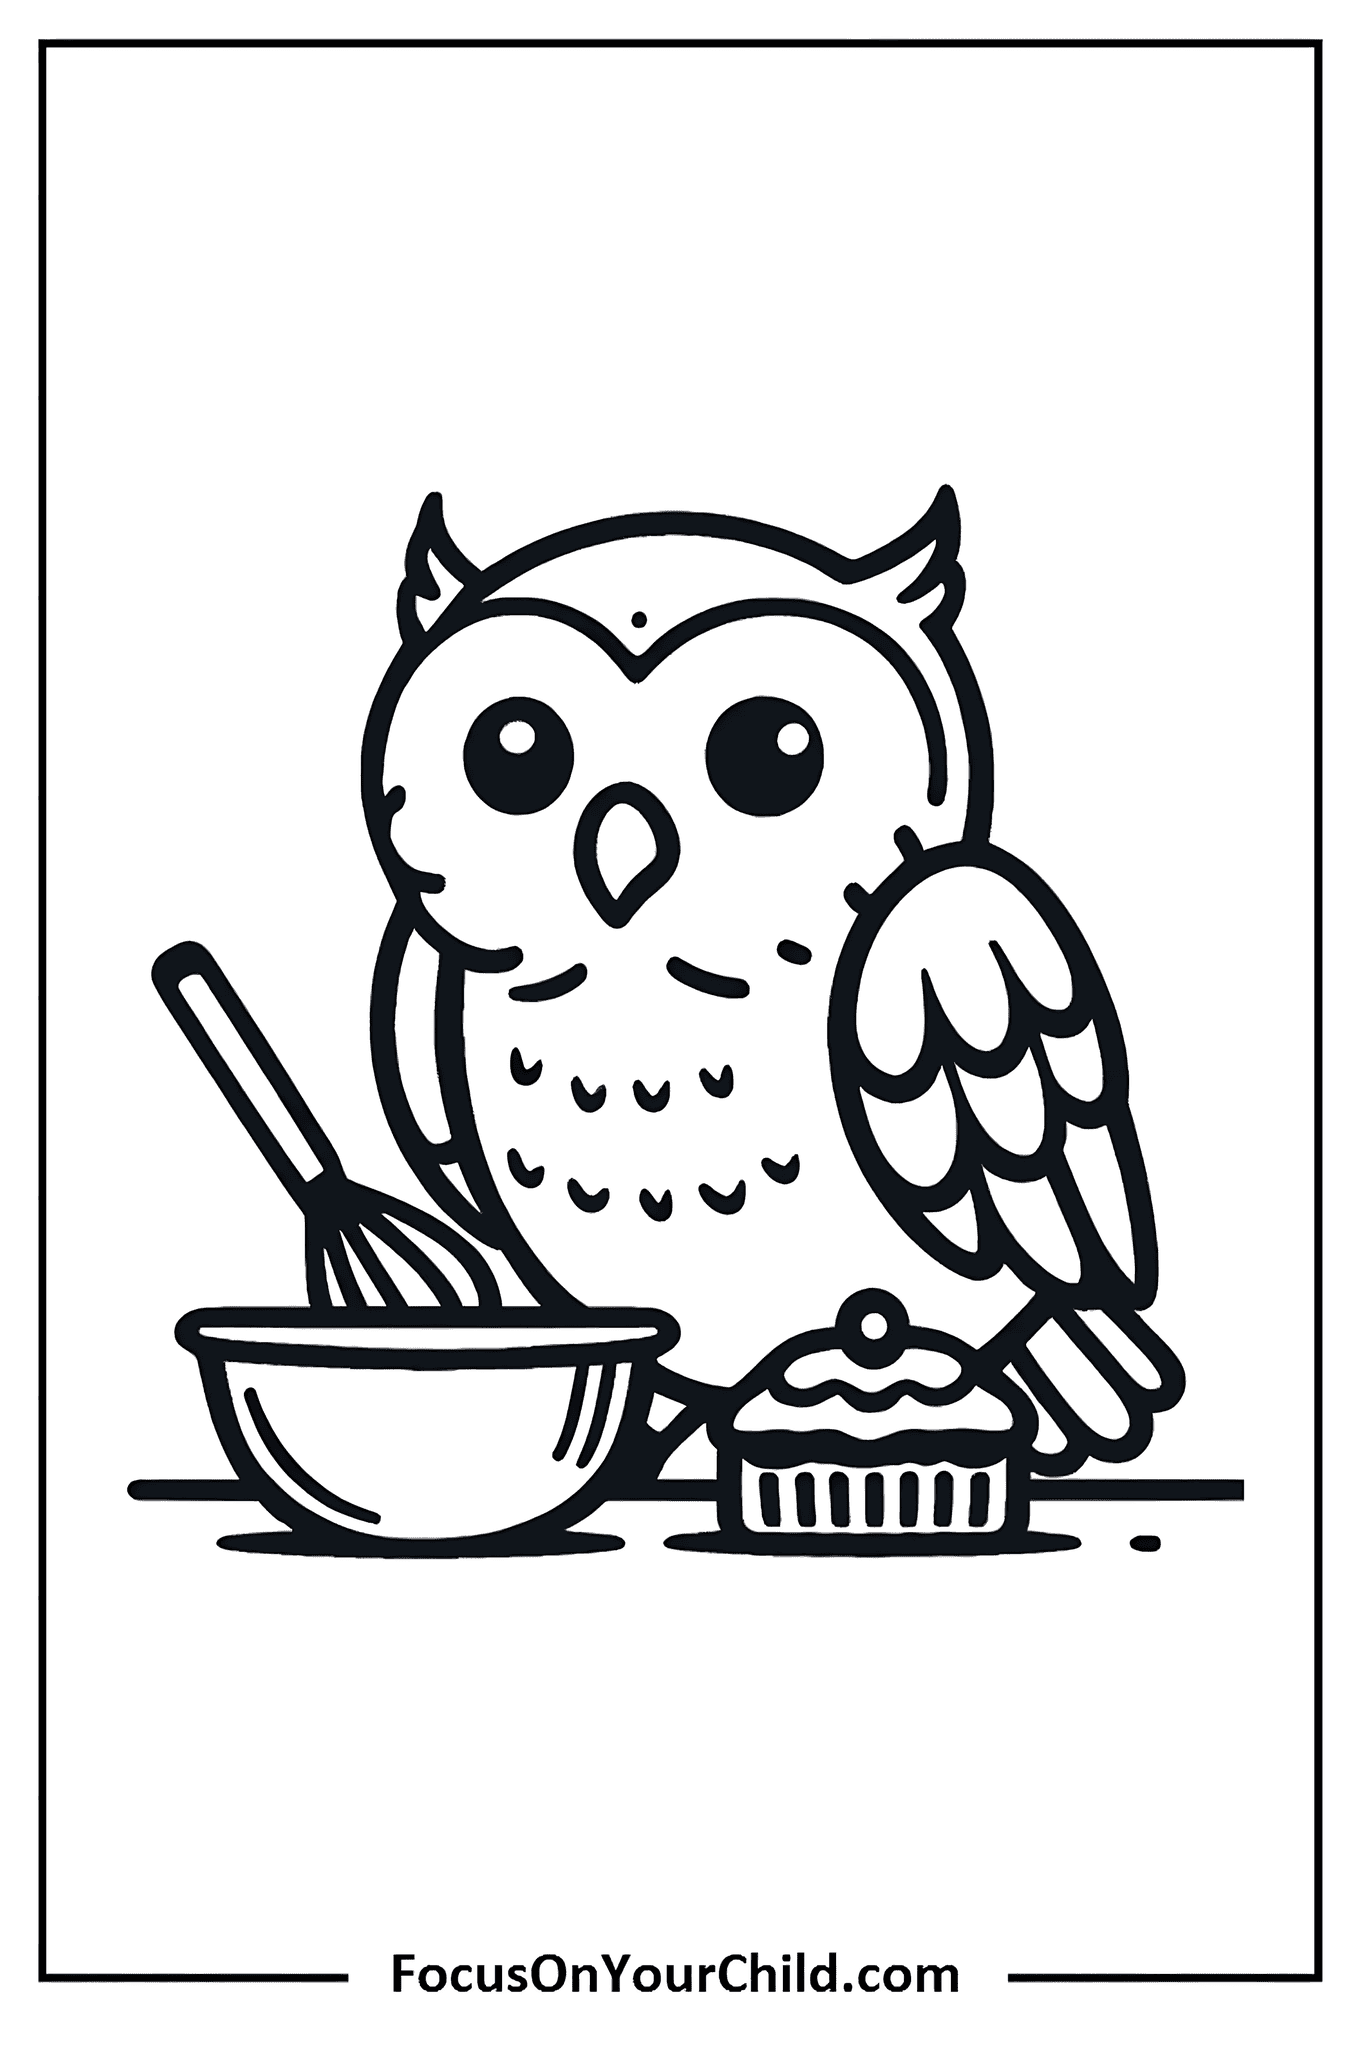 Owl baking cupcakes with a whisk in a whimsical illustration.